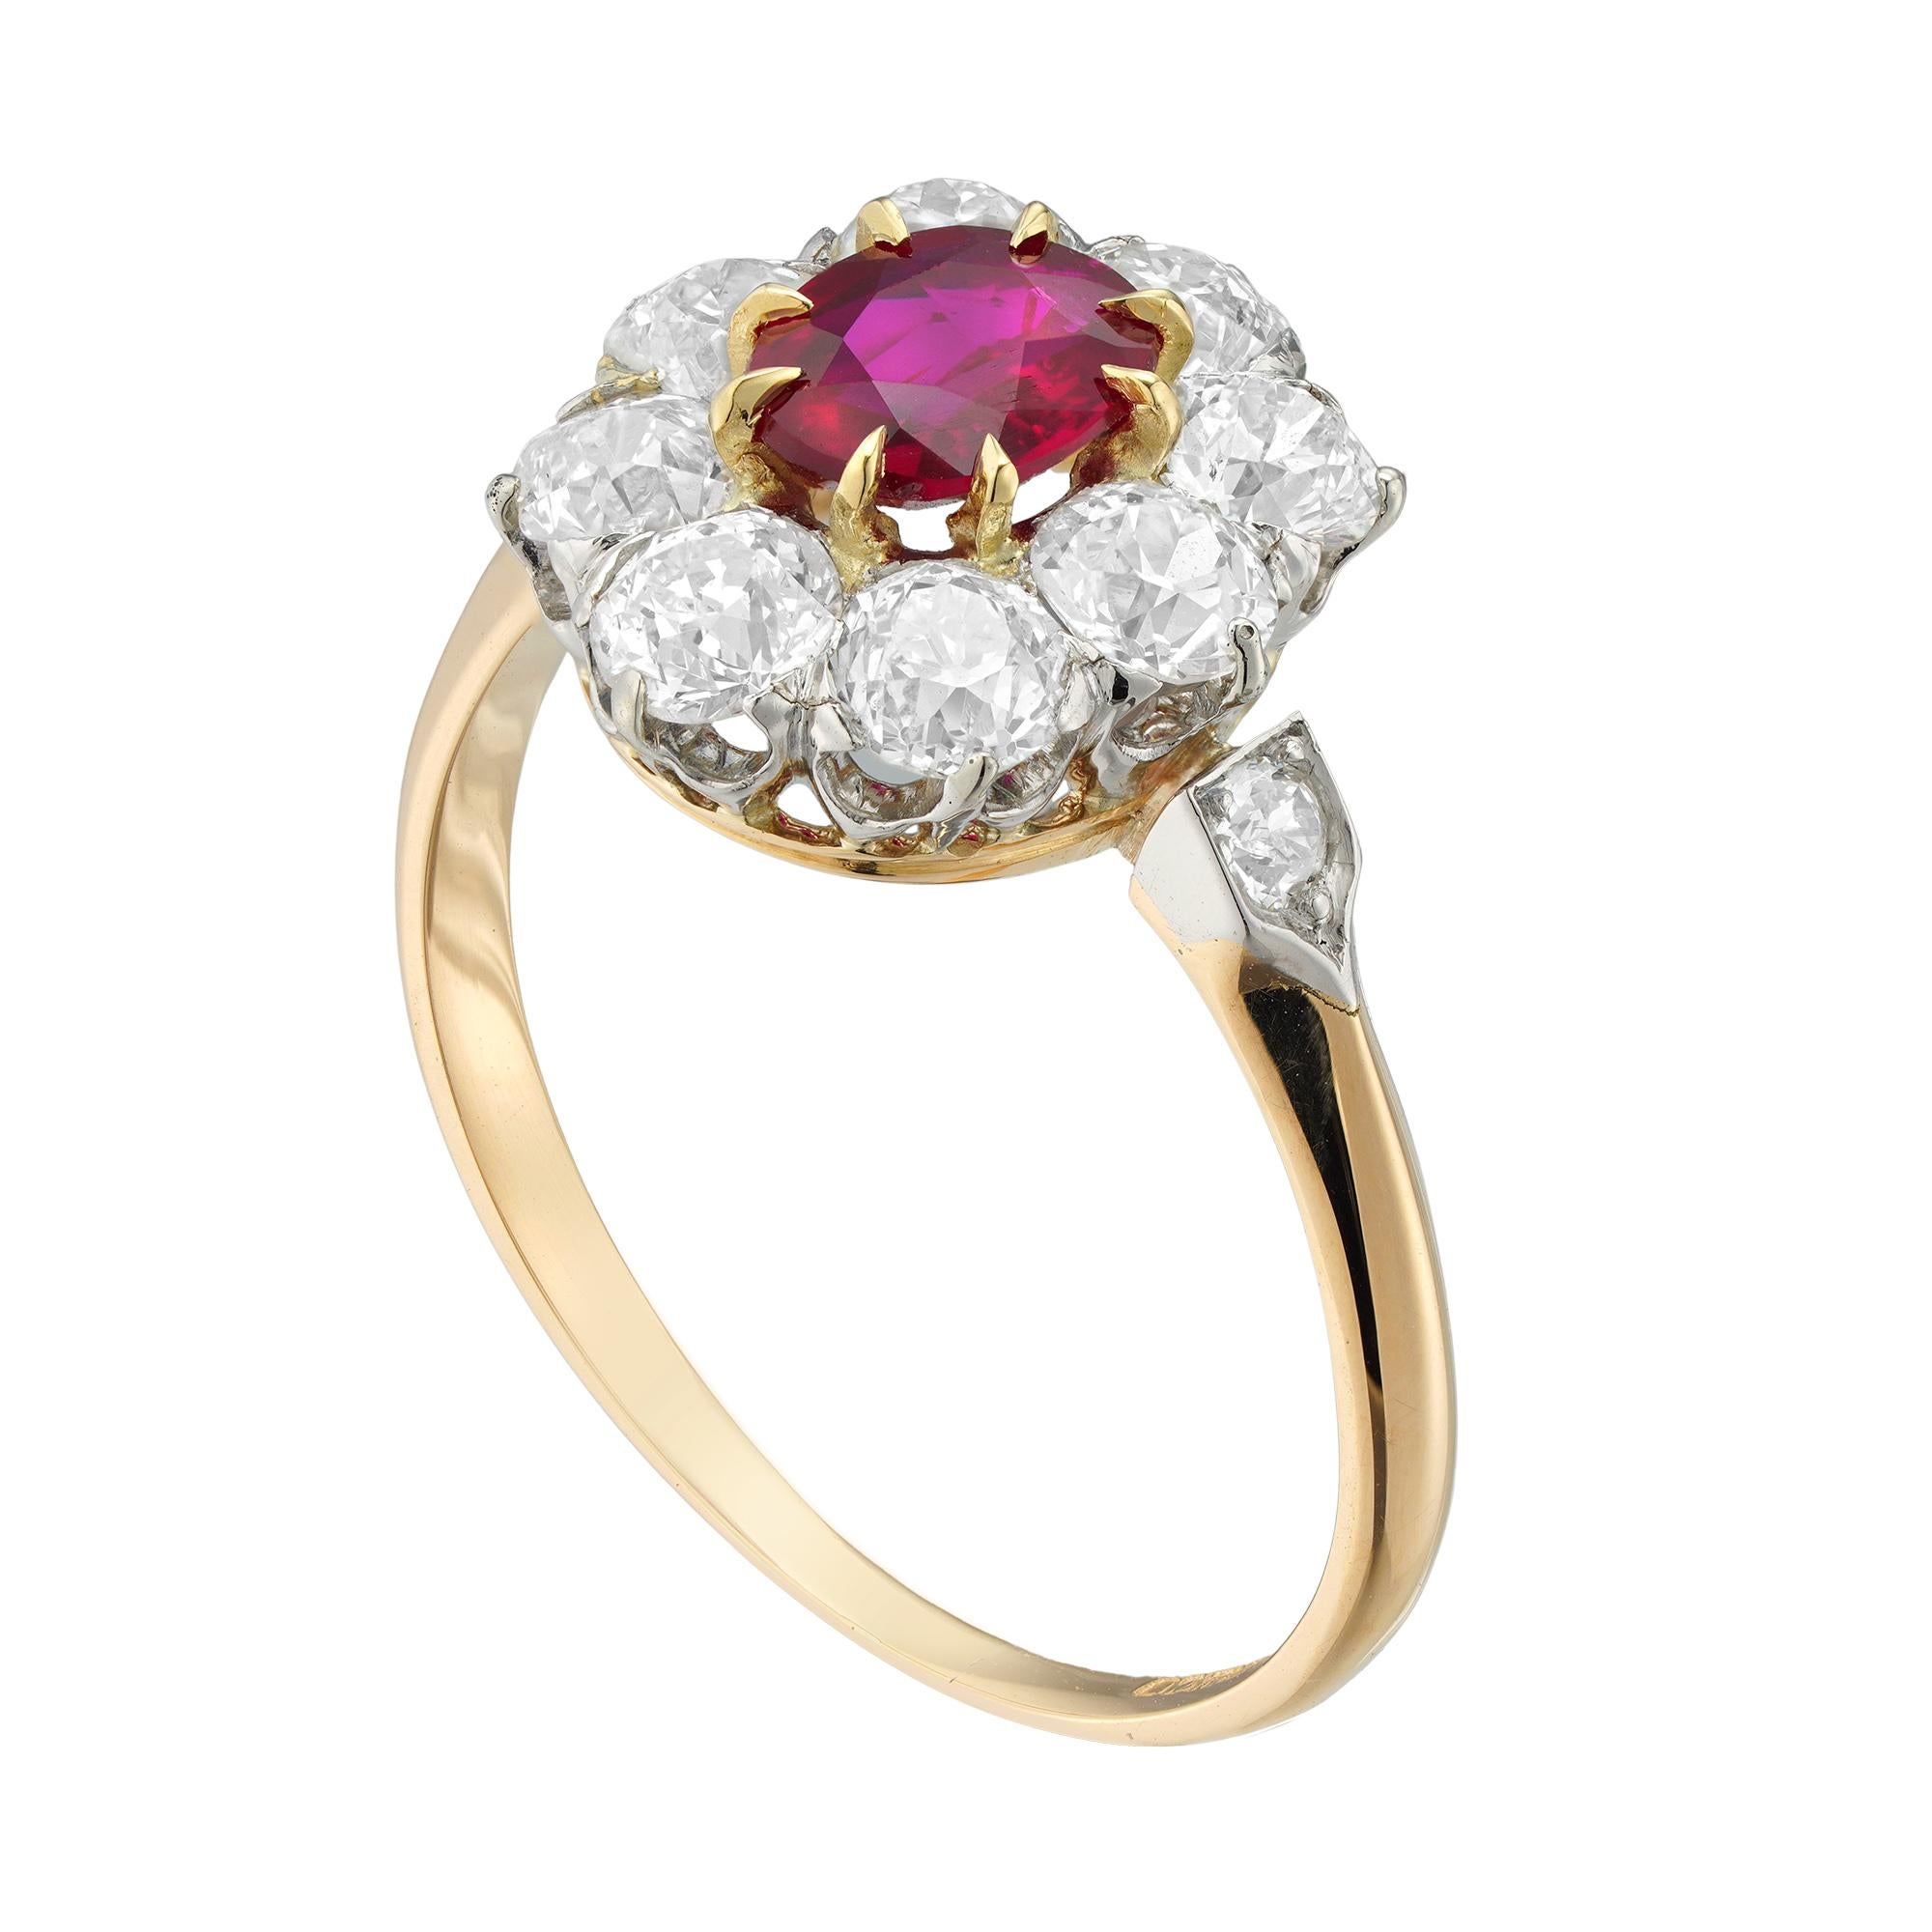 A ruby and diamond cluster ring, the oval faceted ruby estimated to weigh 0.65 carats, surrounded by eight old brilliant-cut diamonds estimated to weigh 1.35 carats in total, all claw set in a white to yellow gold mount with diamond set